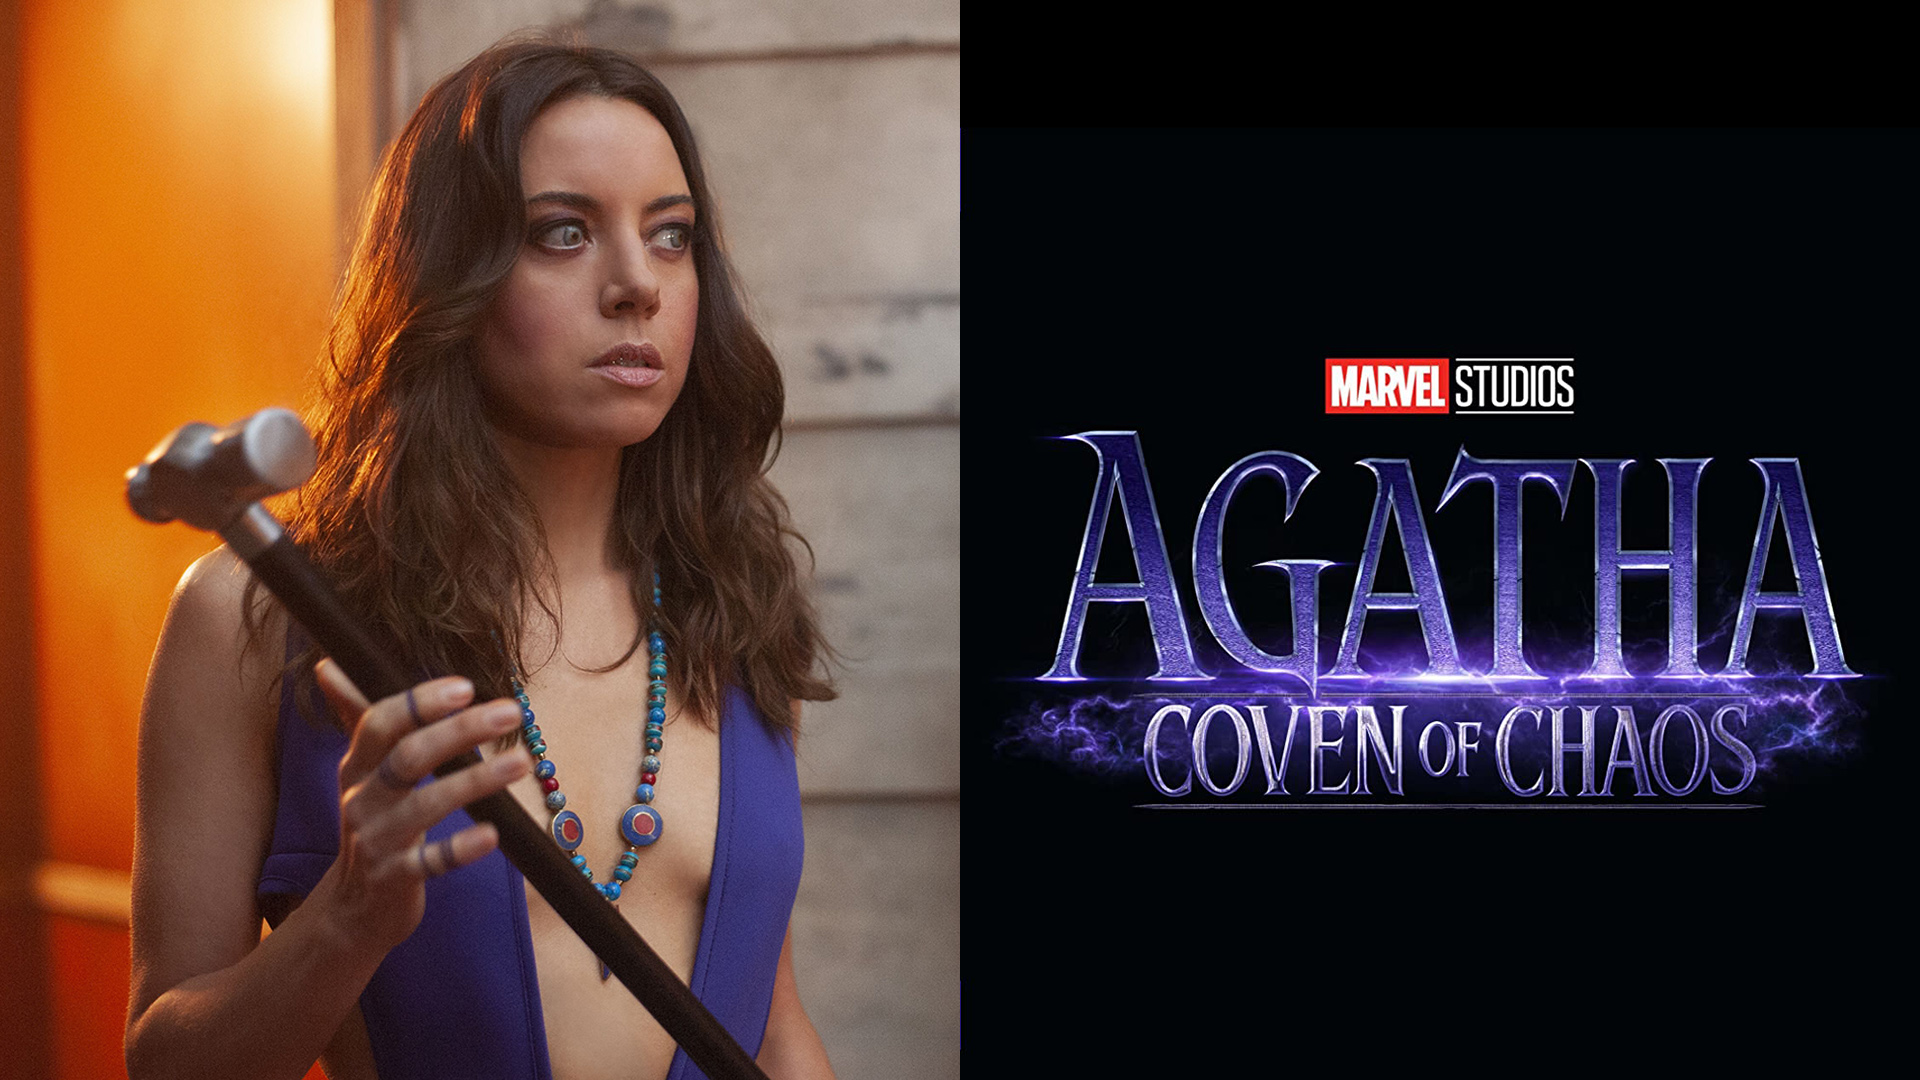 Aubrey Plaza's Agatha: Coven of Chaos character is rumored to be both powerful and well known.